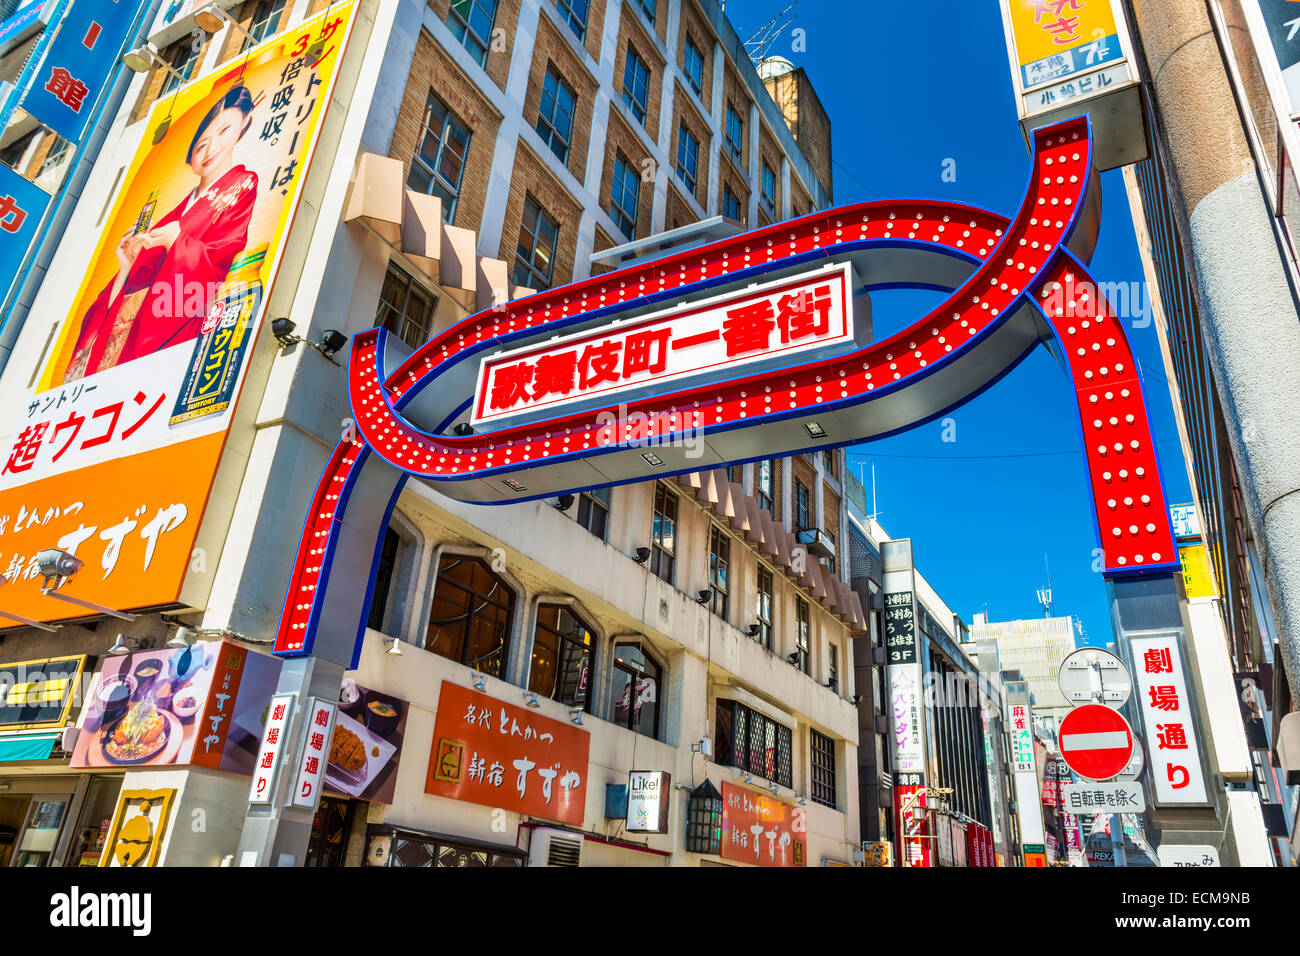 TOKYO, JAPAN - MARCH 15, 2014: Sign marking the entrance to the main alleyway in Kabuki-cho. The area is a renown nightlife and Stock Photo